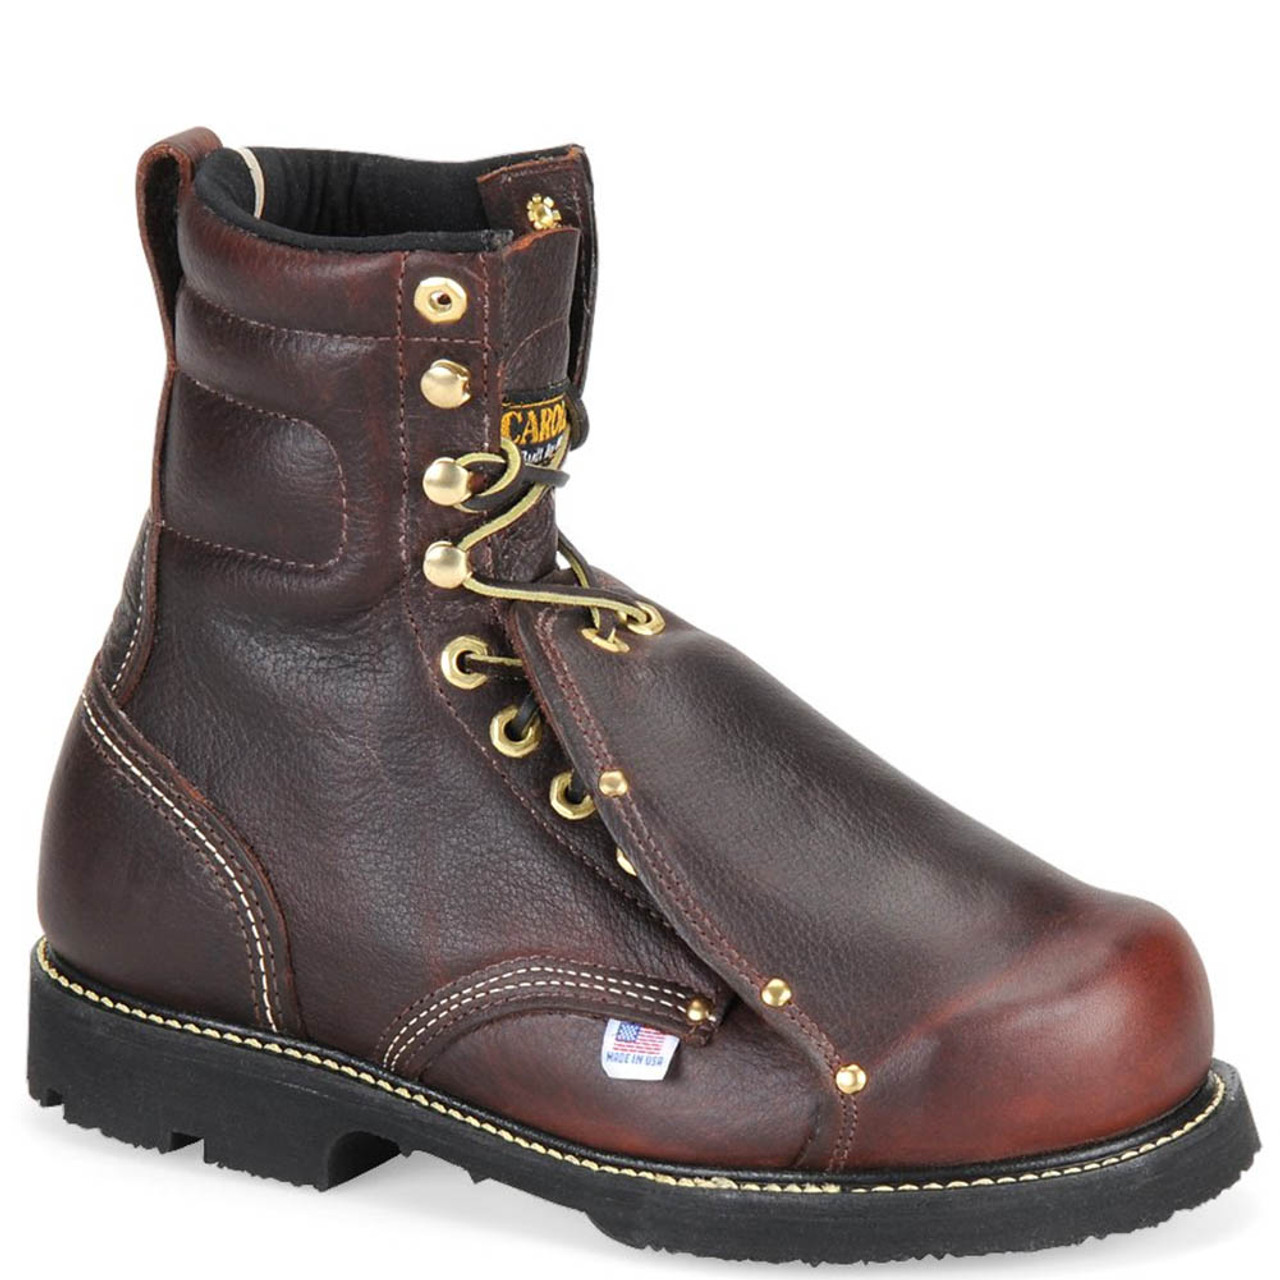 Best Met Guard Work Boots for Your Job in 2023 - Family Footwear Center